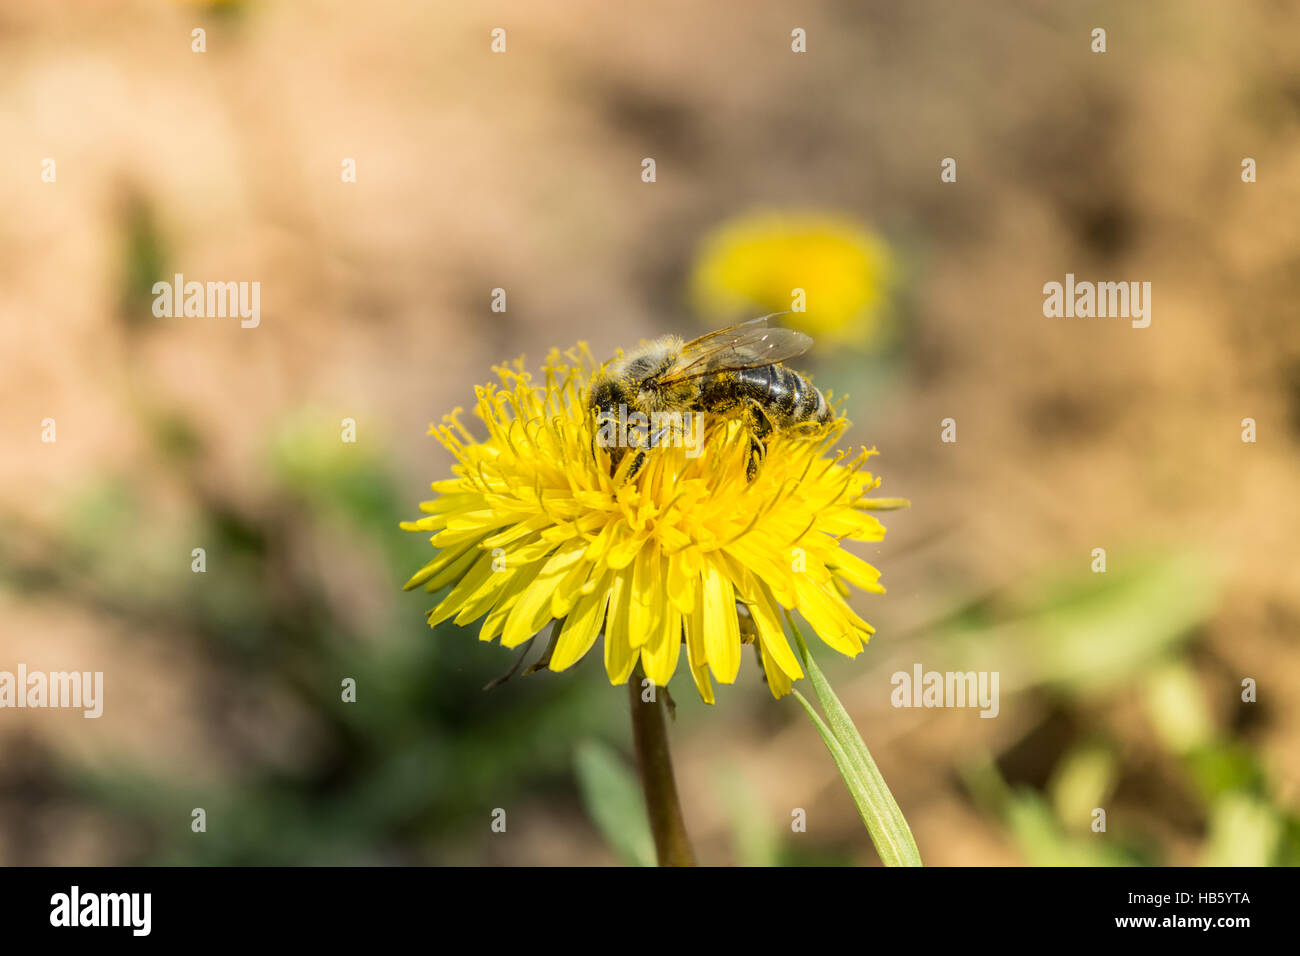 Worker bee on the yelow flower Stock Photo